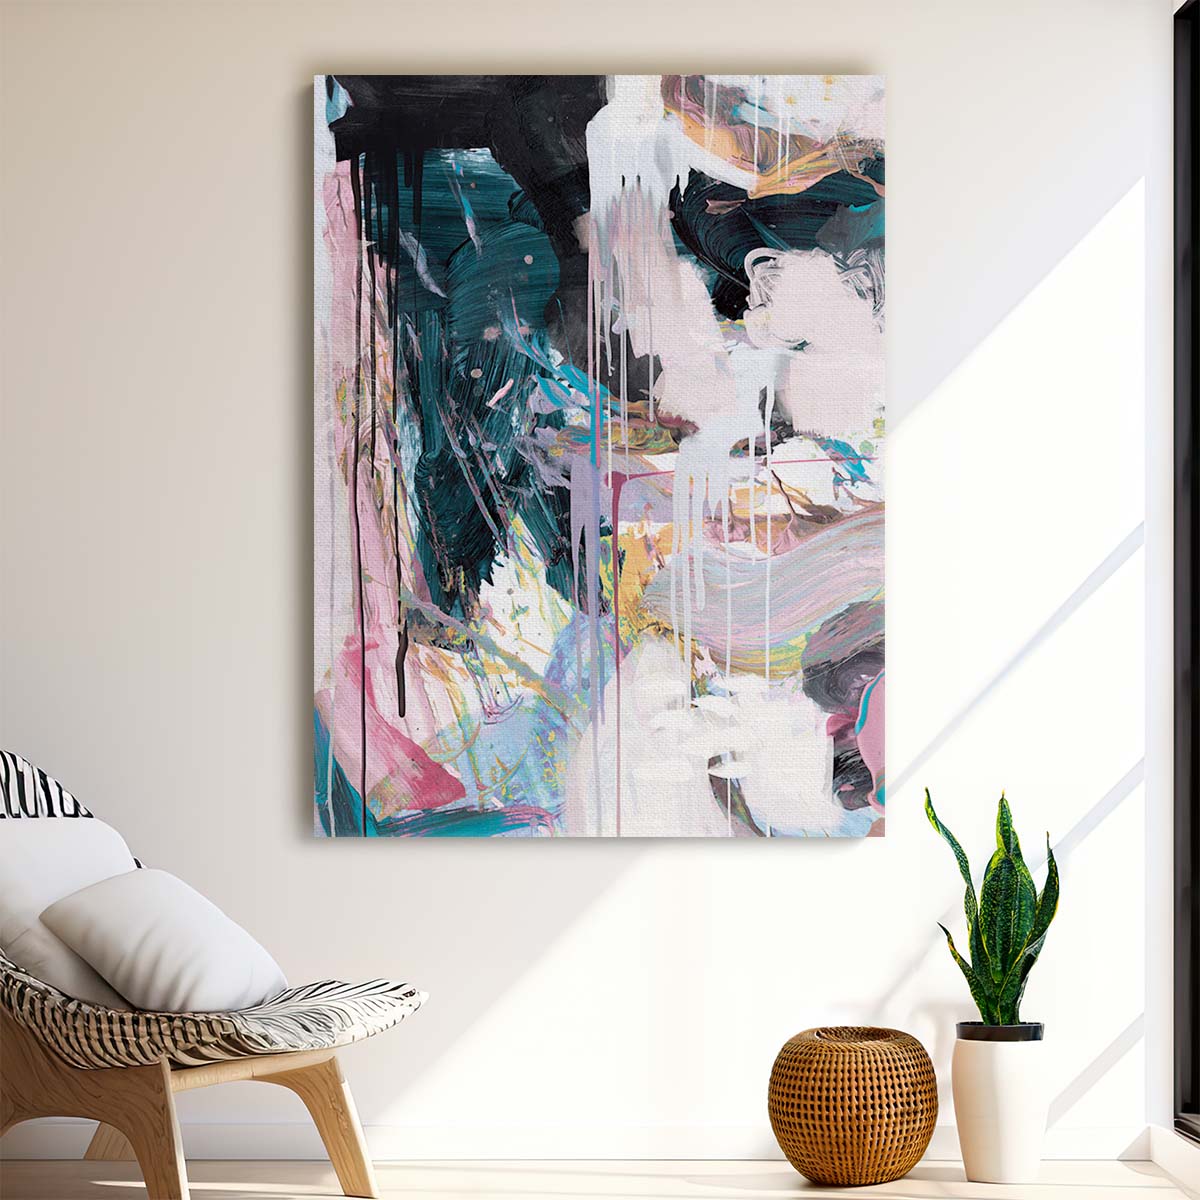 Dan Hobday's Minimalistic Abstract Illustration Blue Pink Dripping Painting by Luxuriance Designs, made in USA